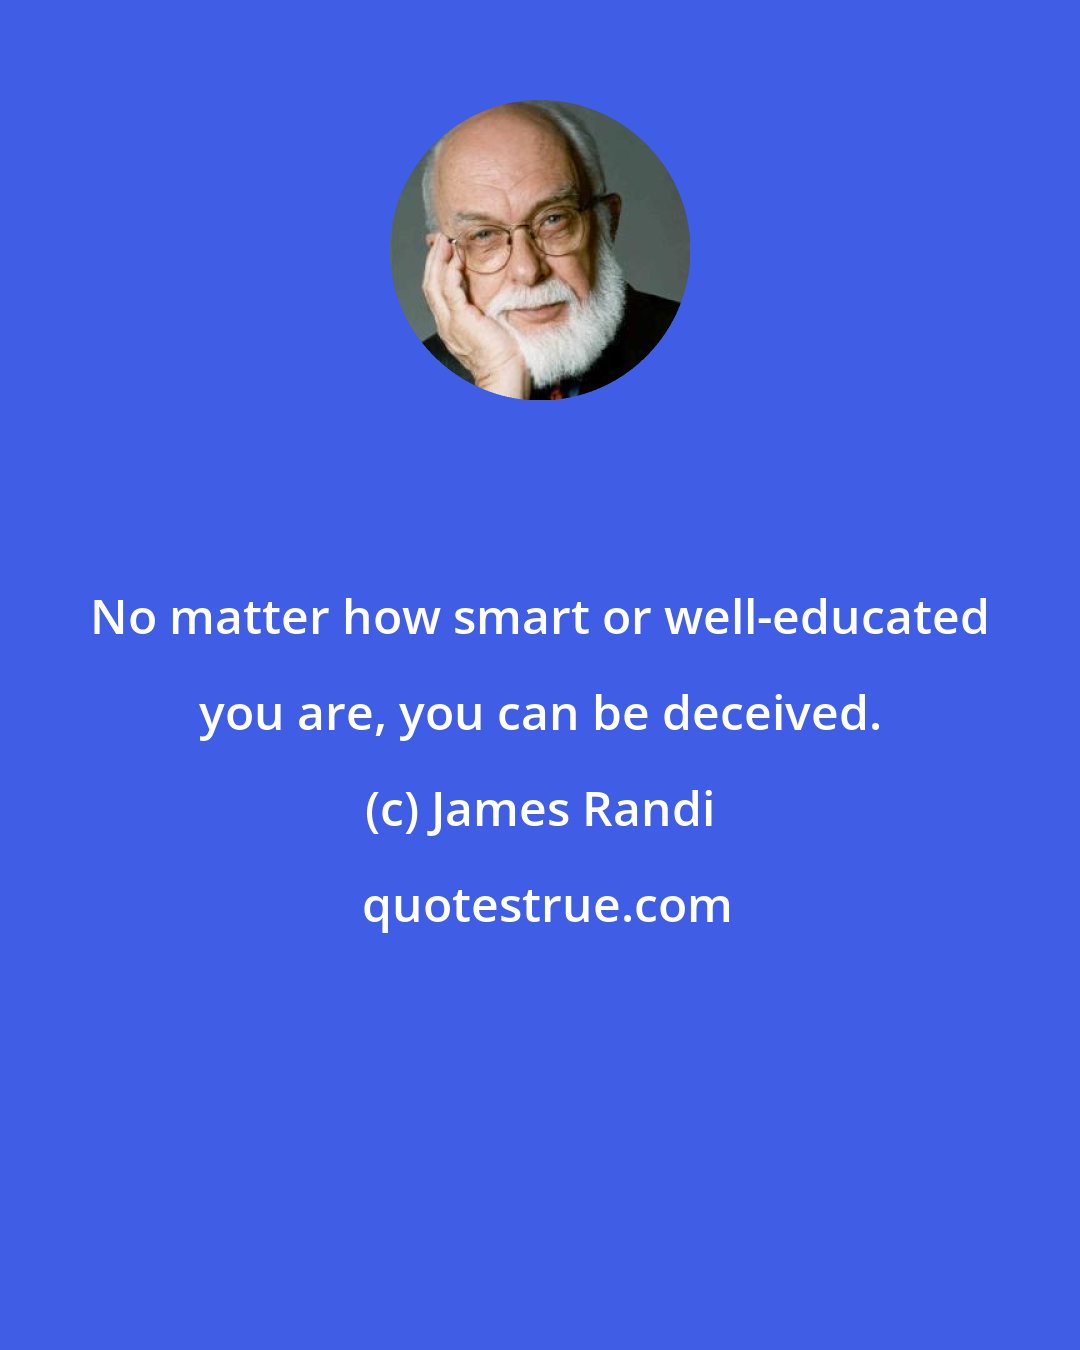 James Randi: No matter how smart or well-educated you are, you can be deceived.